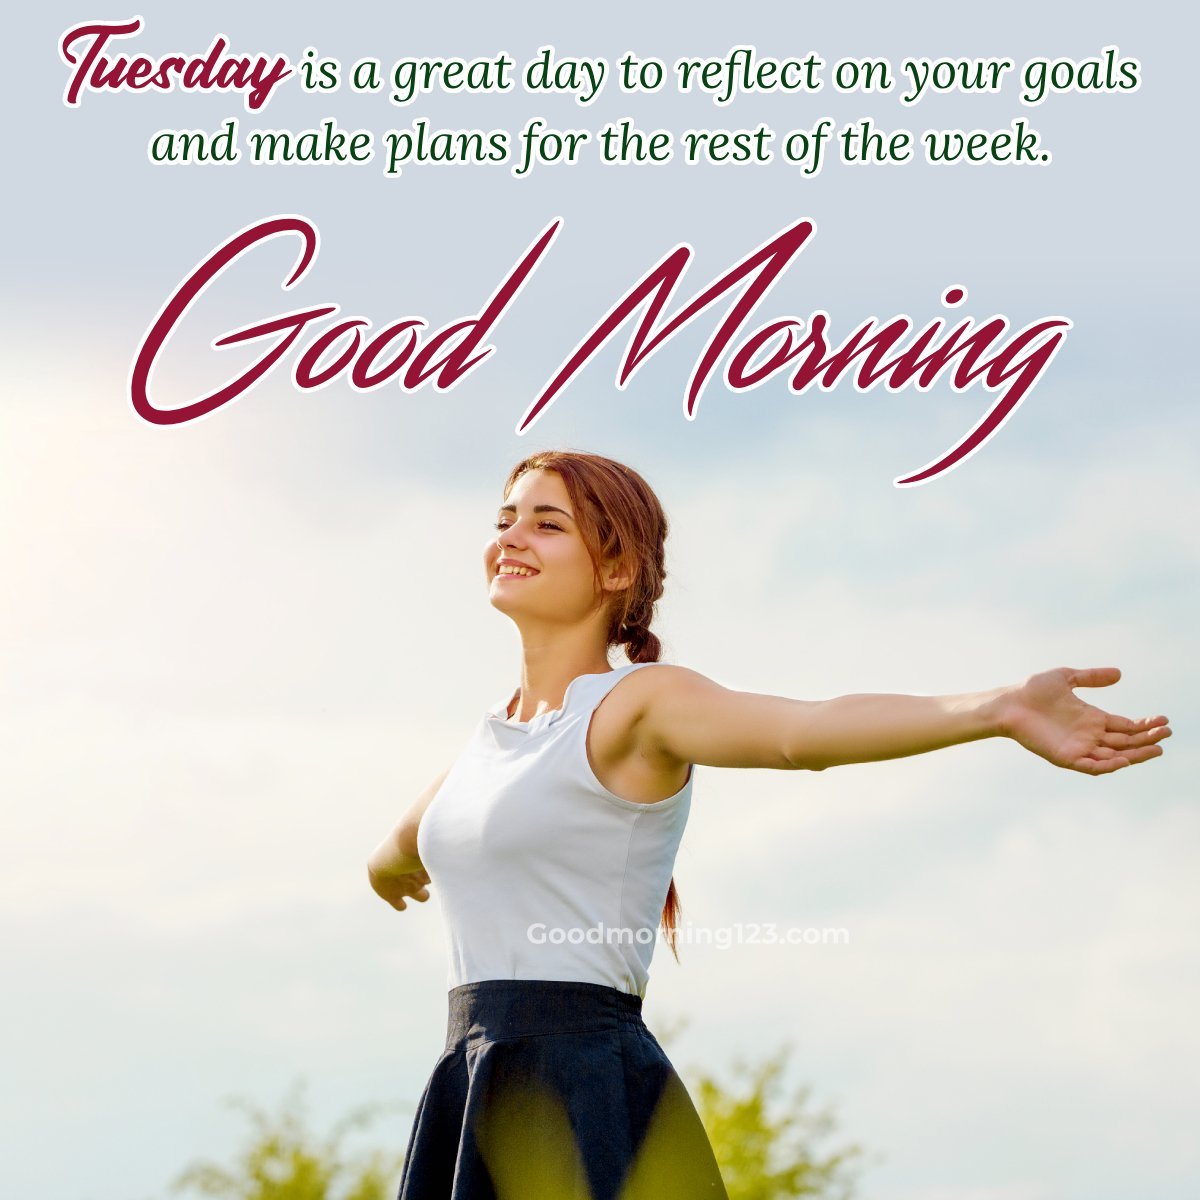 Good Morning! Tuesday Is A Great Day To Reflect